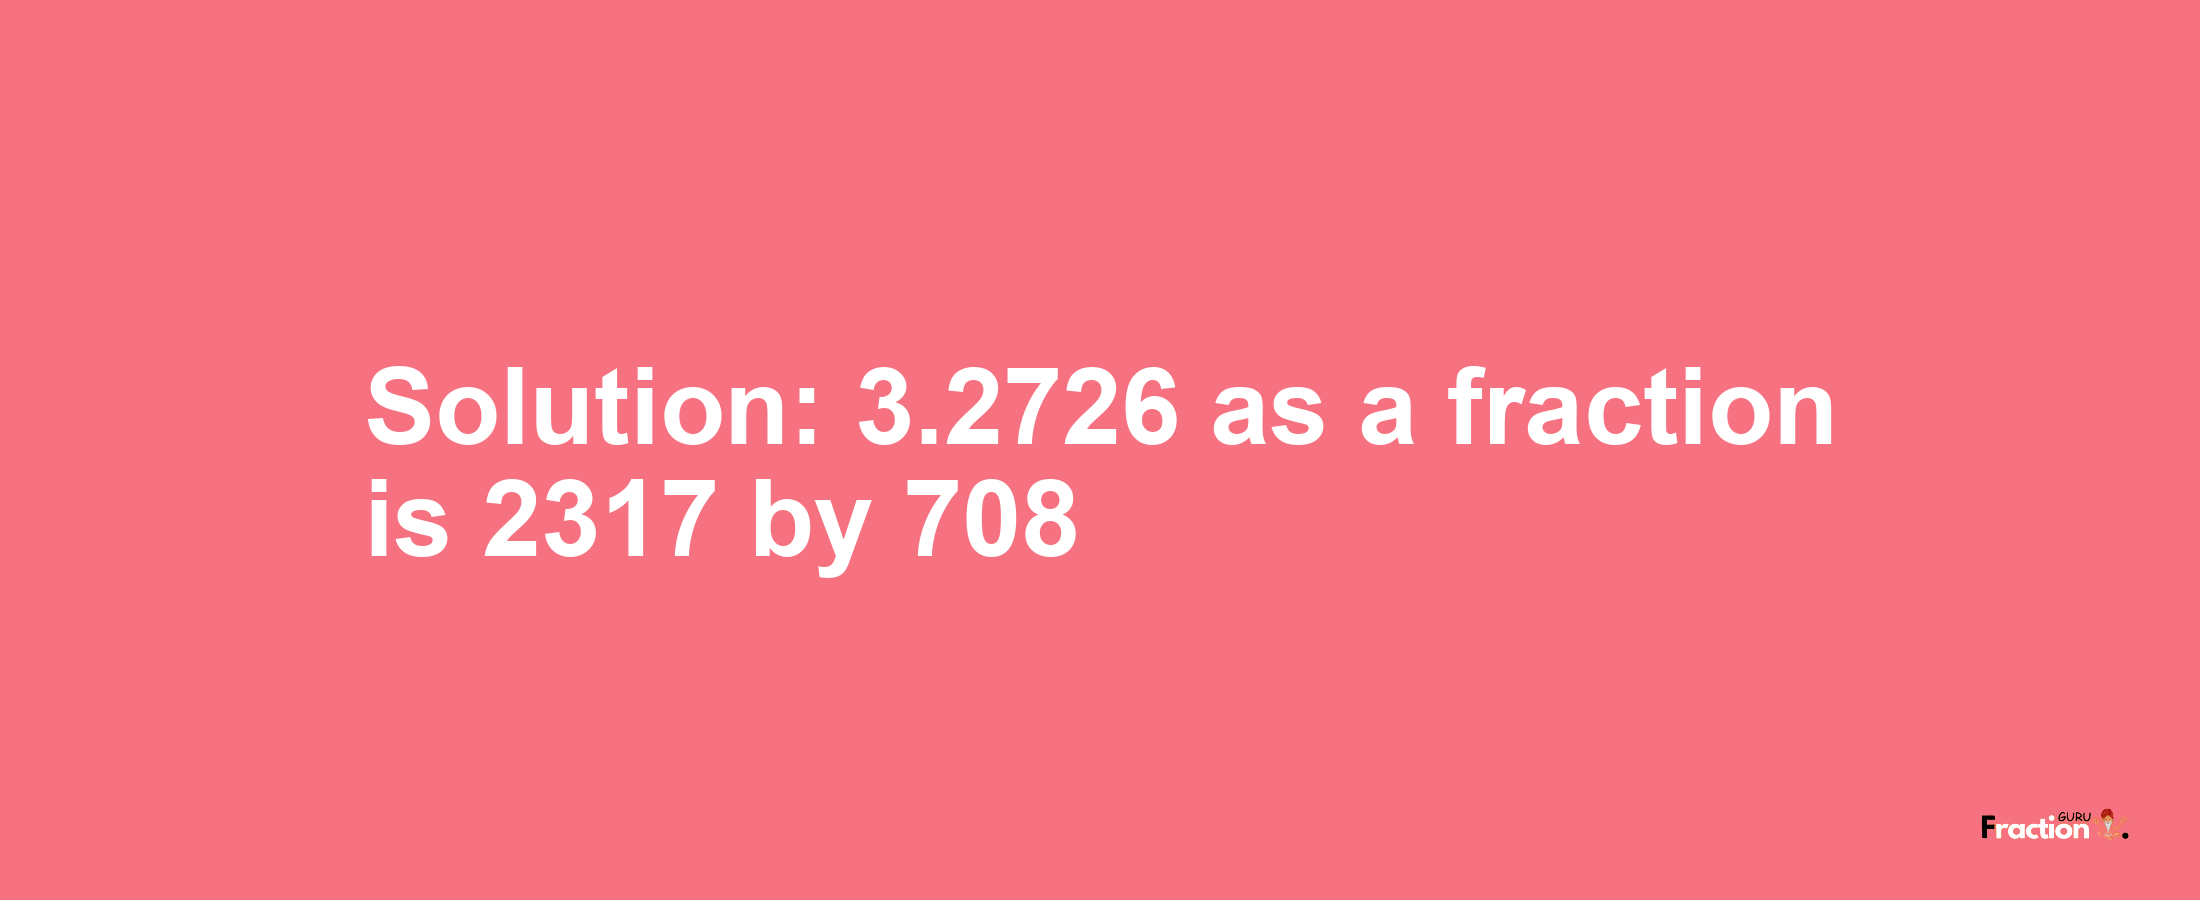 Solution:3.2726 as a fraction is 2317/708